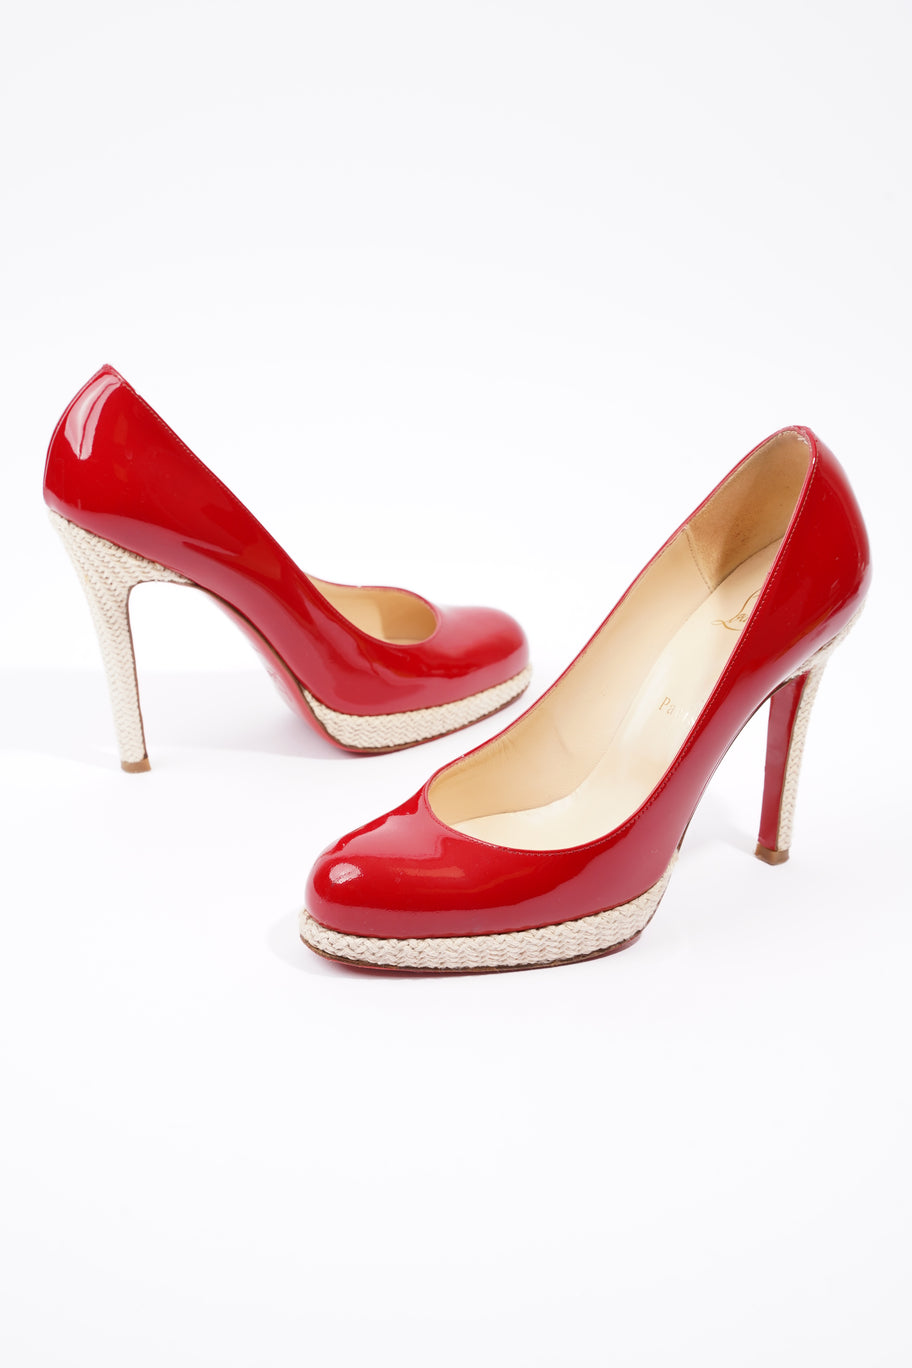 New Simple Pump 120 Red Patent Leather EU 39 UK 6 Image 9